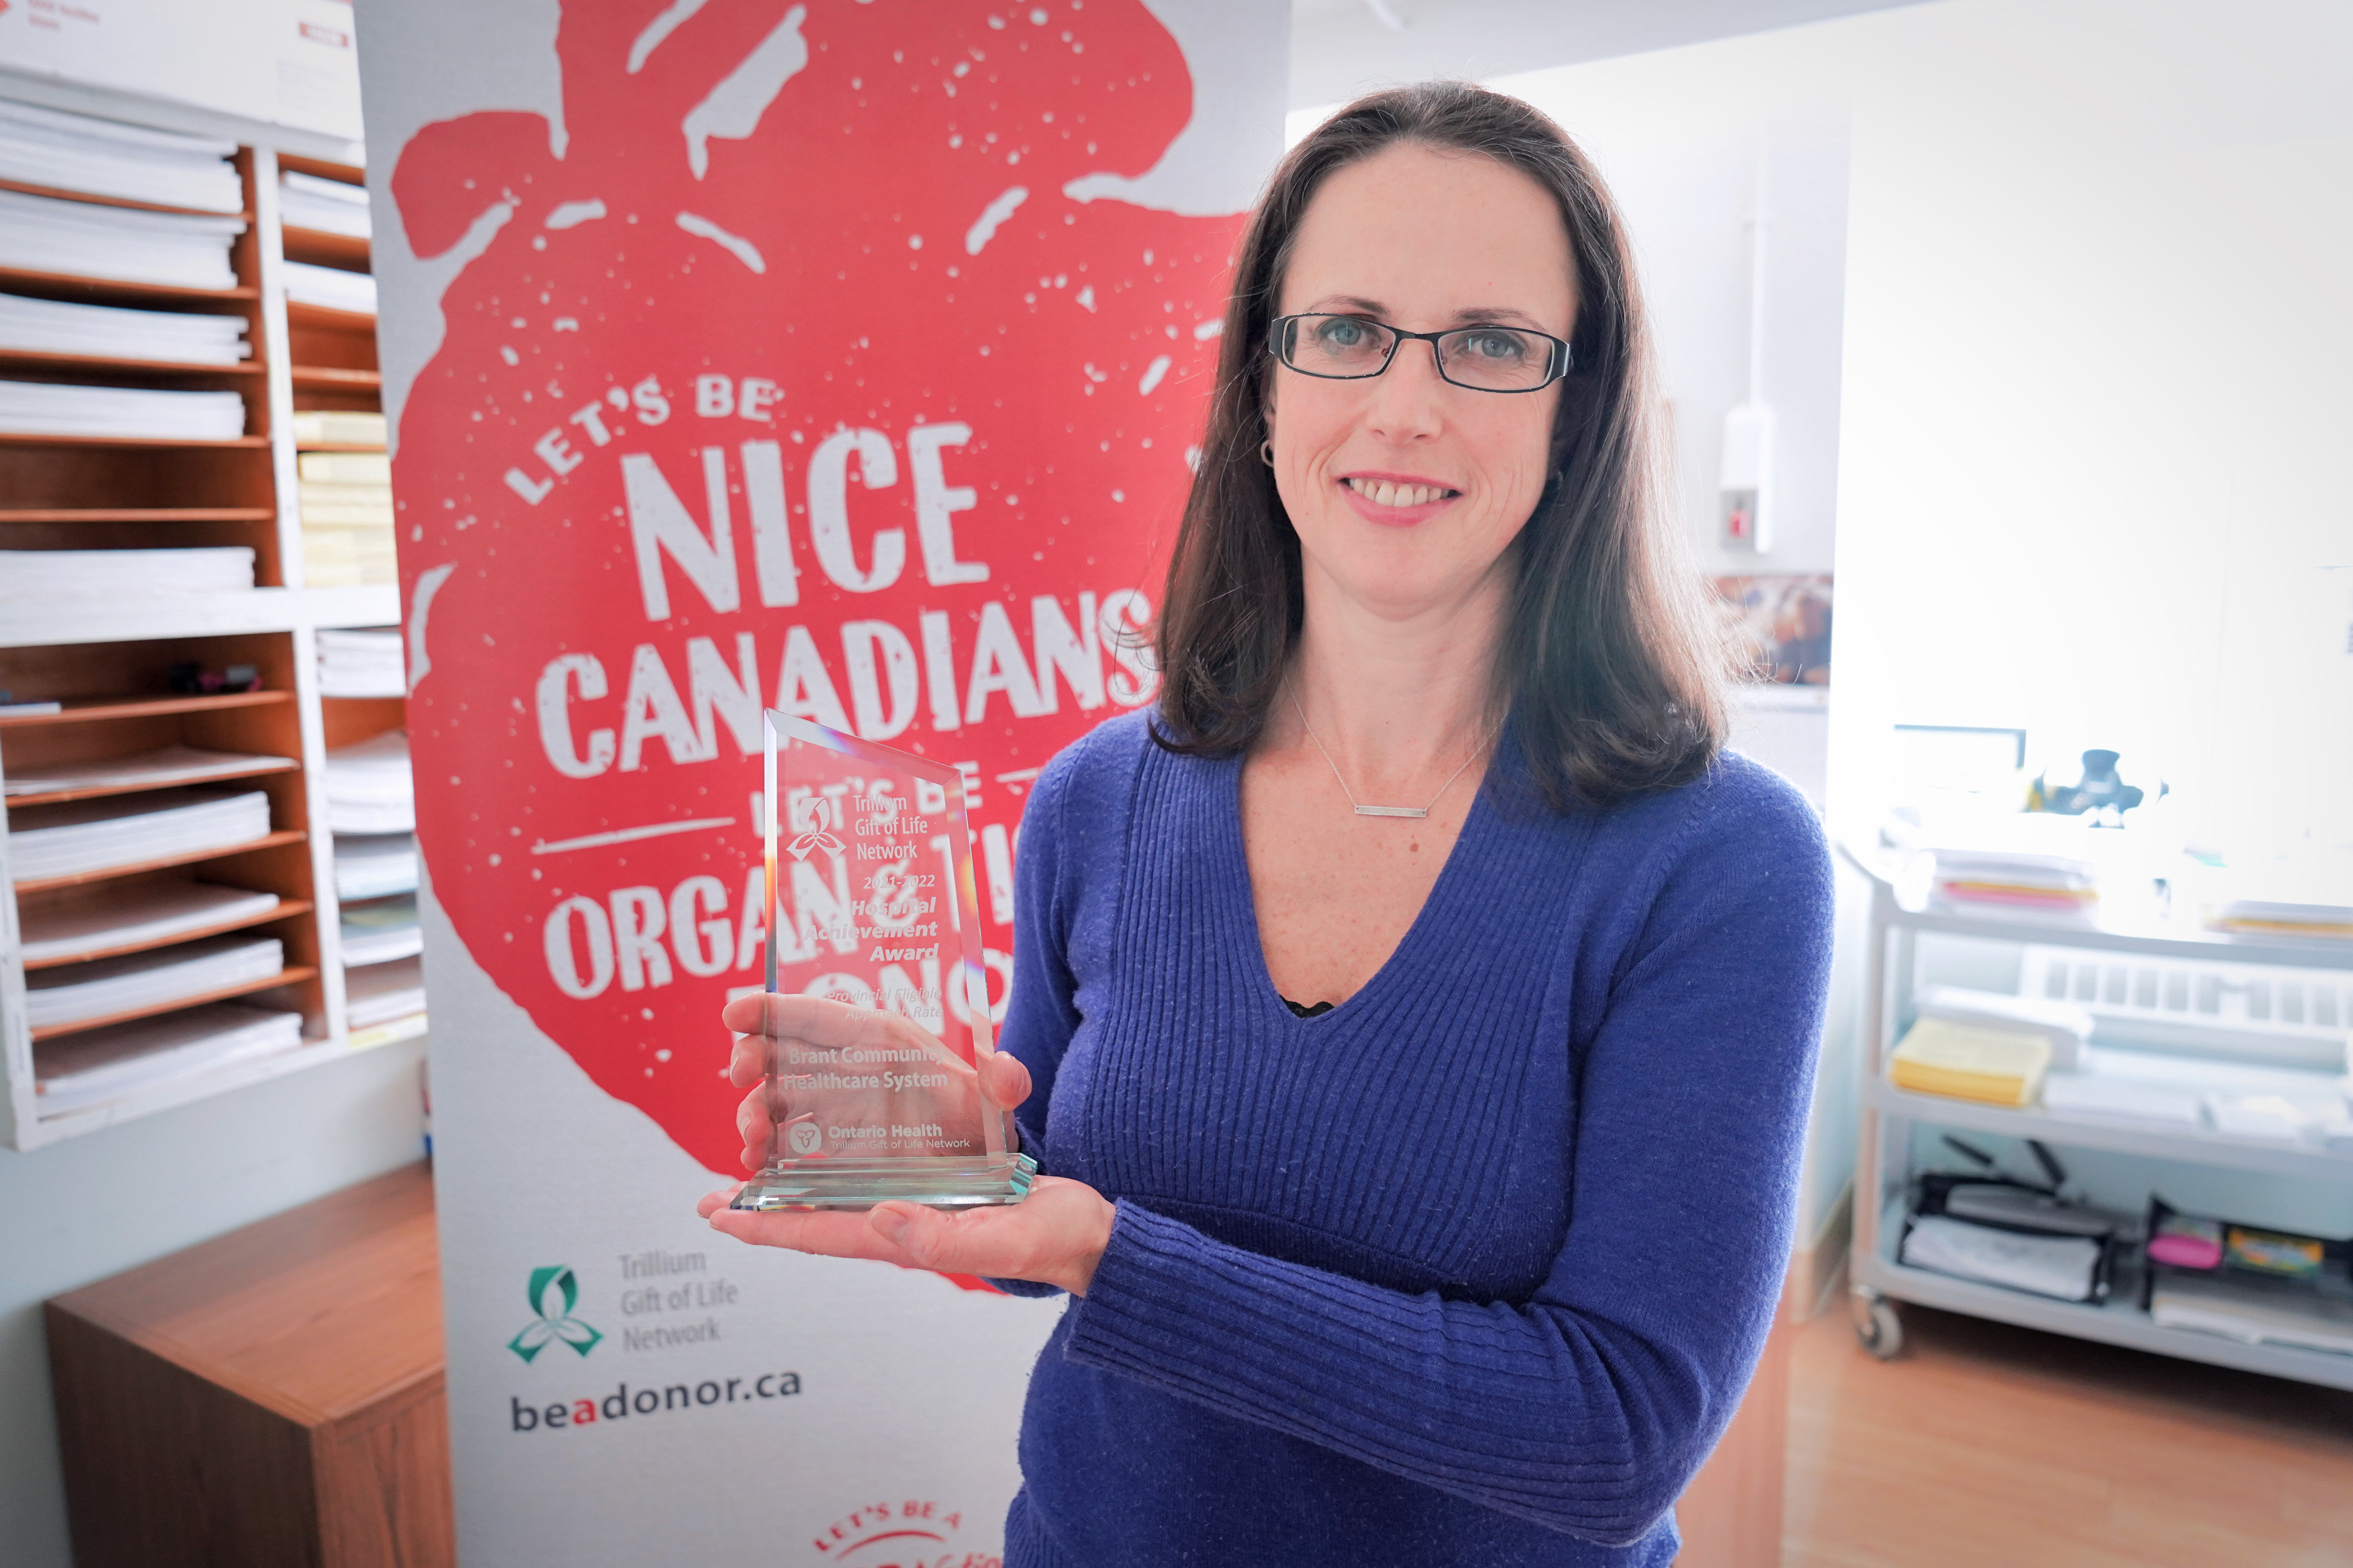 Dr. Anna Rozenberg is the lead physician at the Brant Community Healthcare System working to facilitate organ and tissue donations.